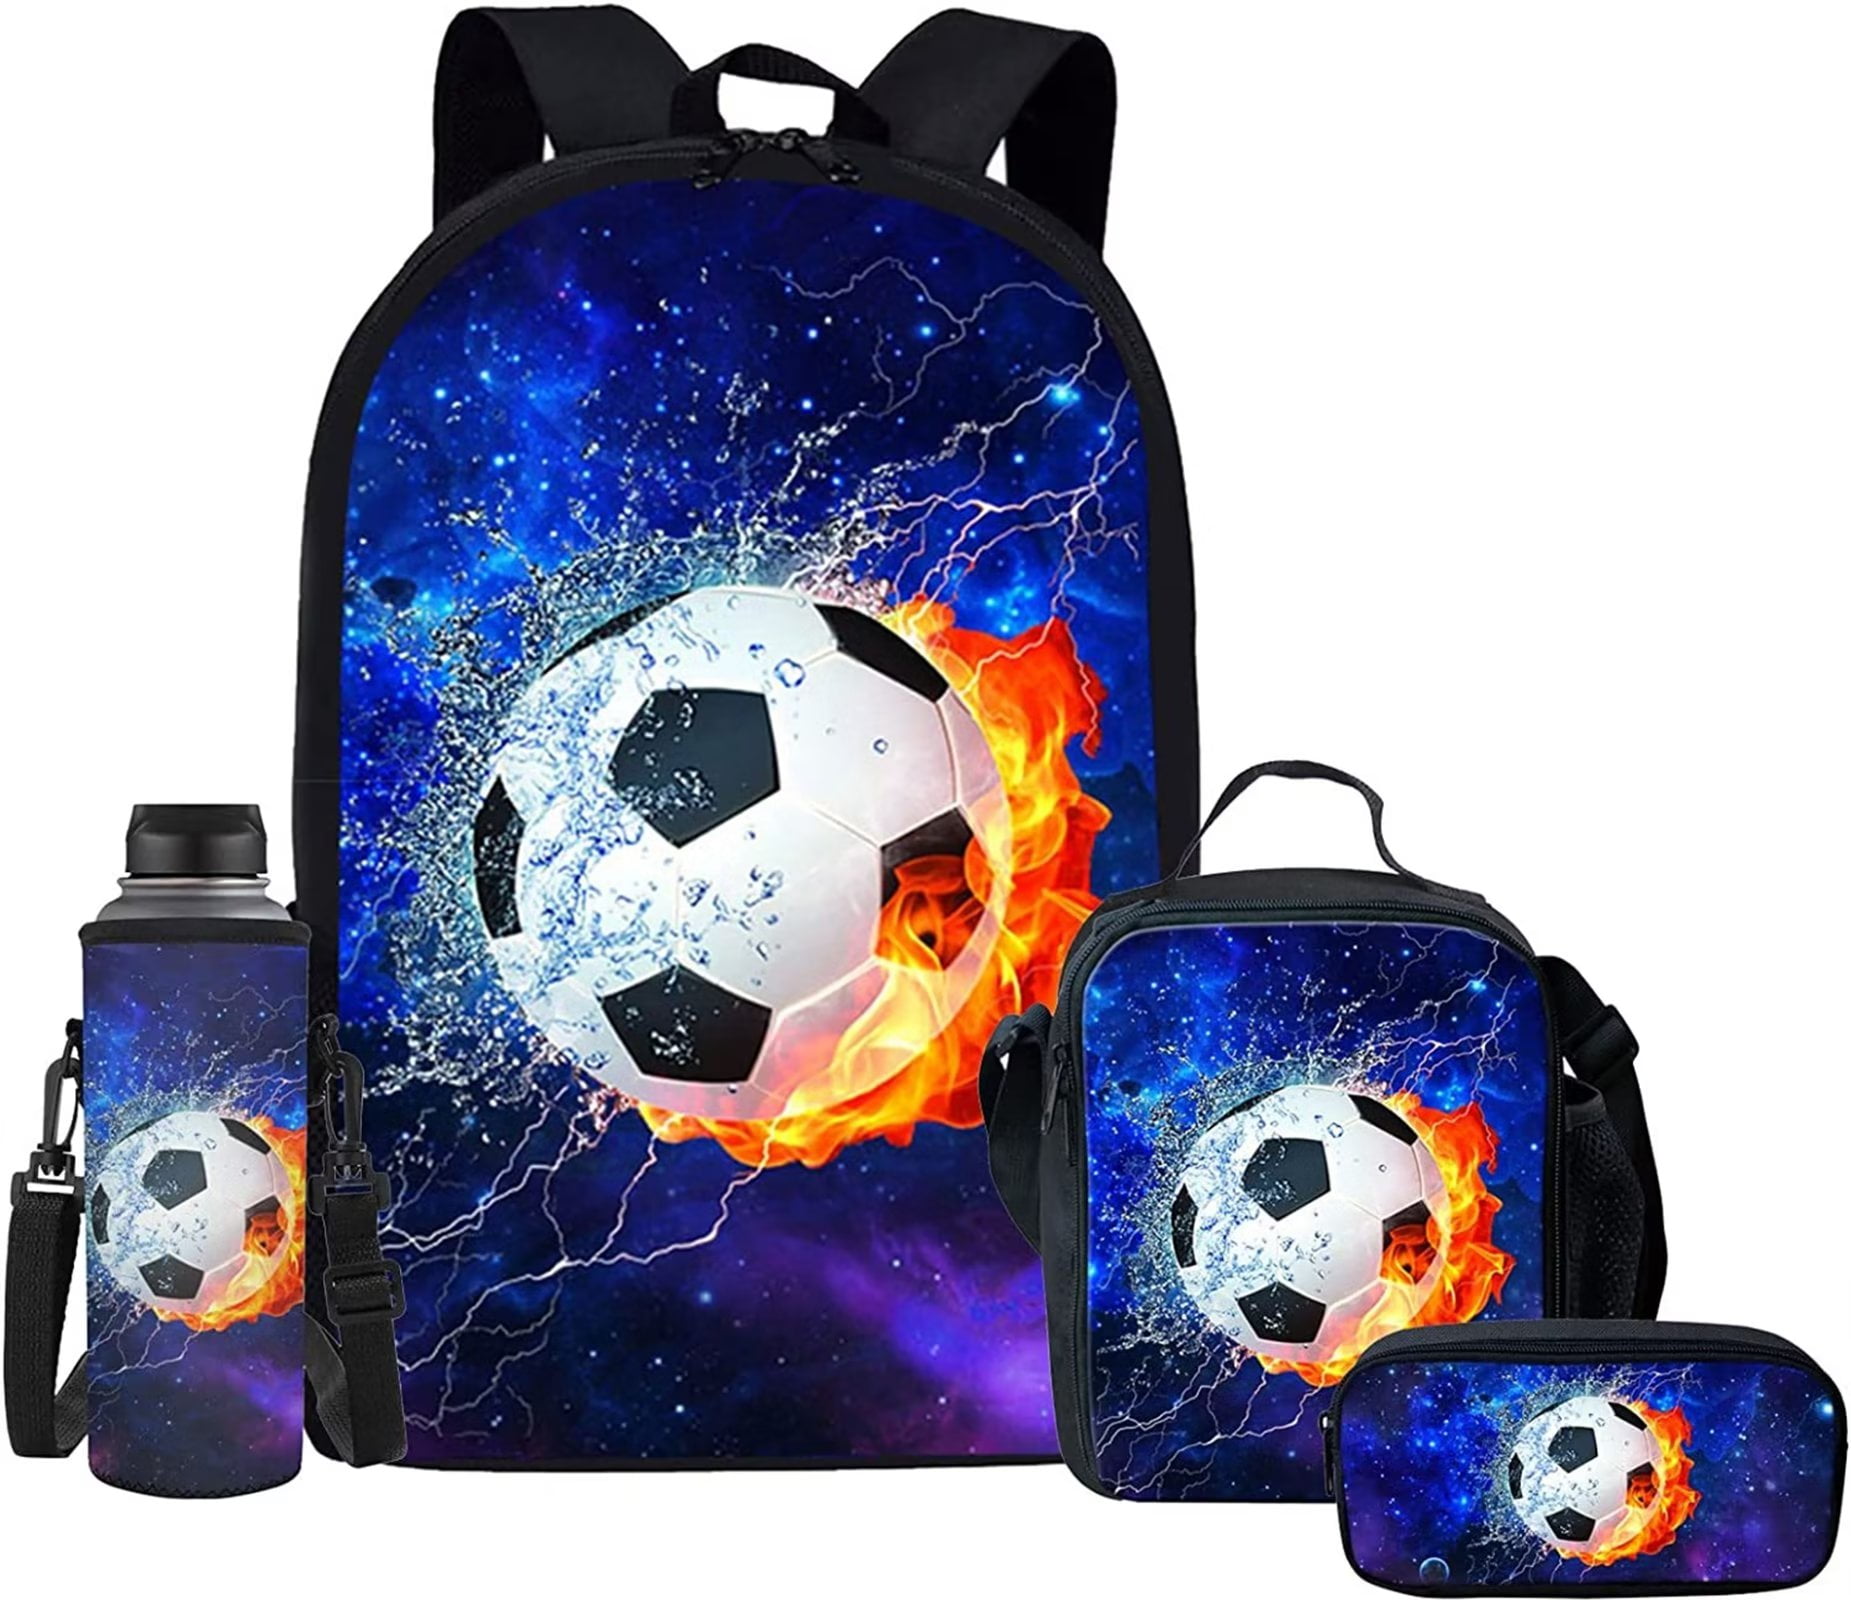 Pzuqiu Water Soccer Boys Girls School Book Bags 3 Piece, Elementary Middle  School Backpack with Lunch Bag Water Bottle Sleeve